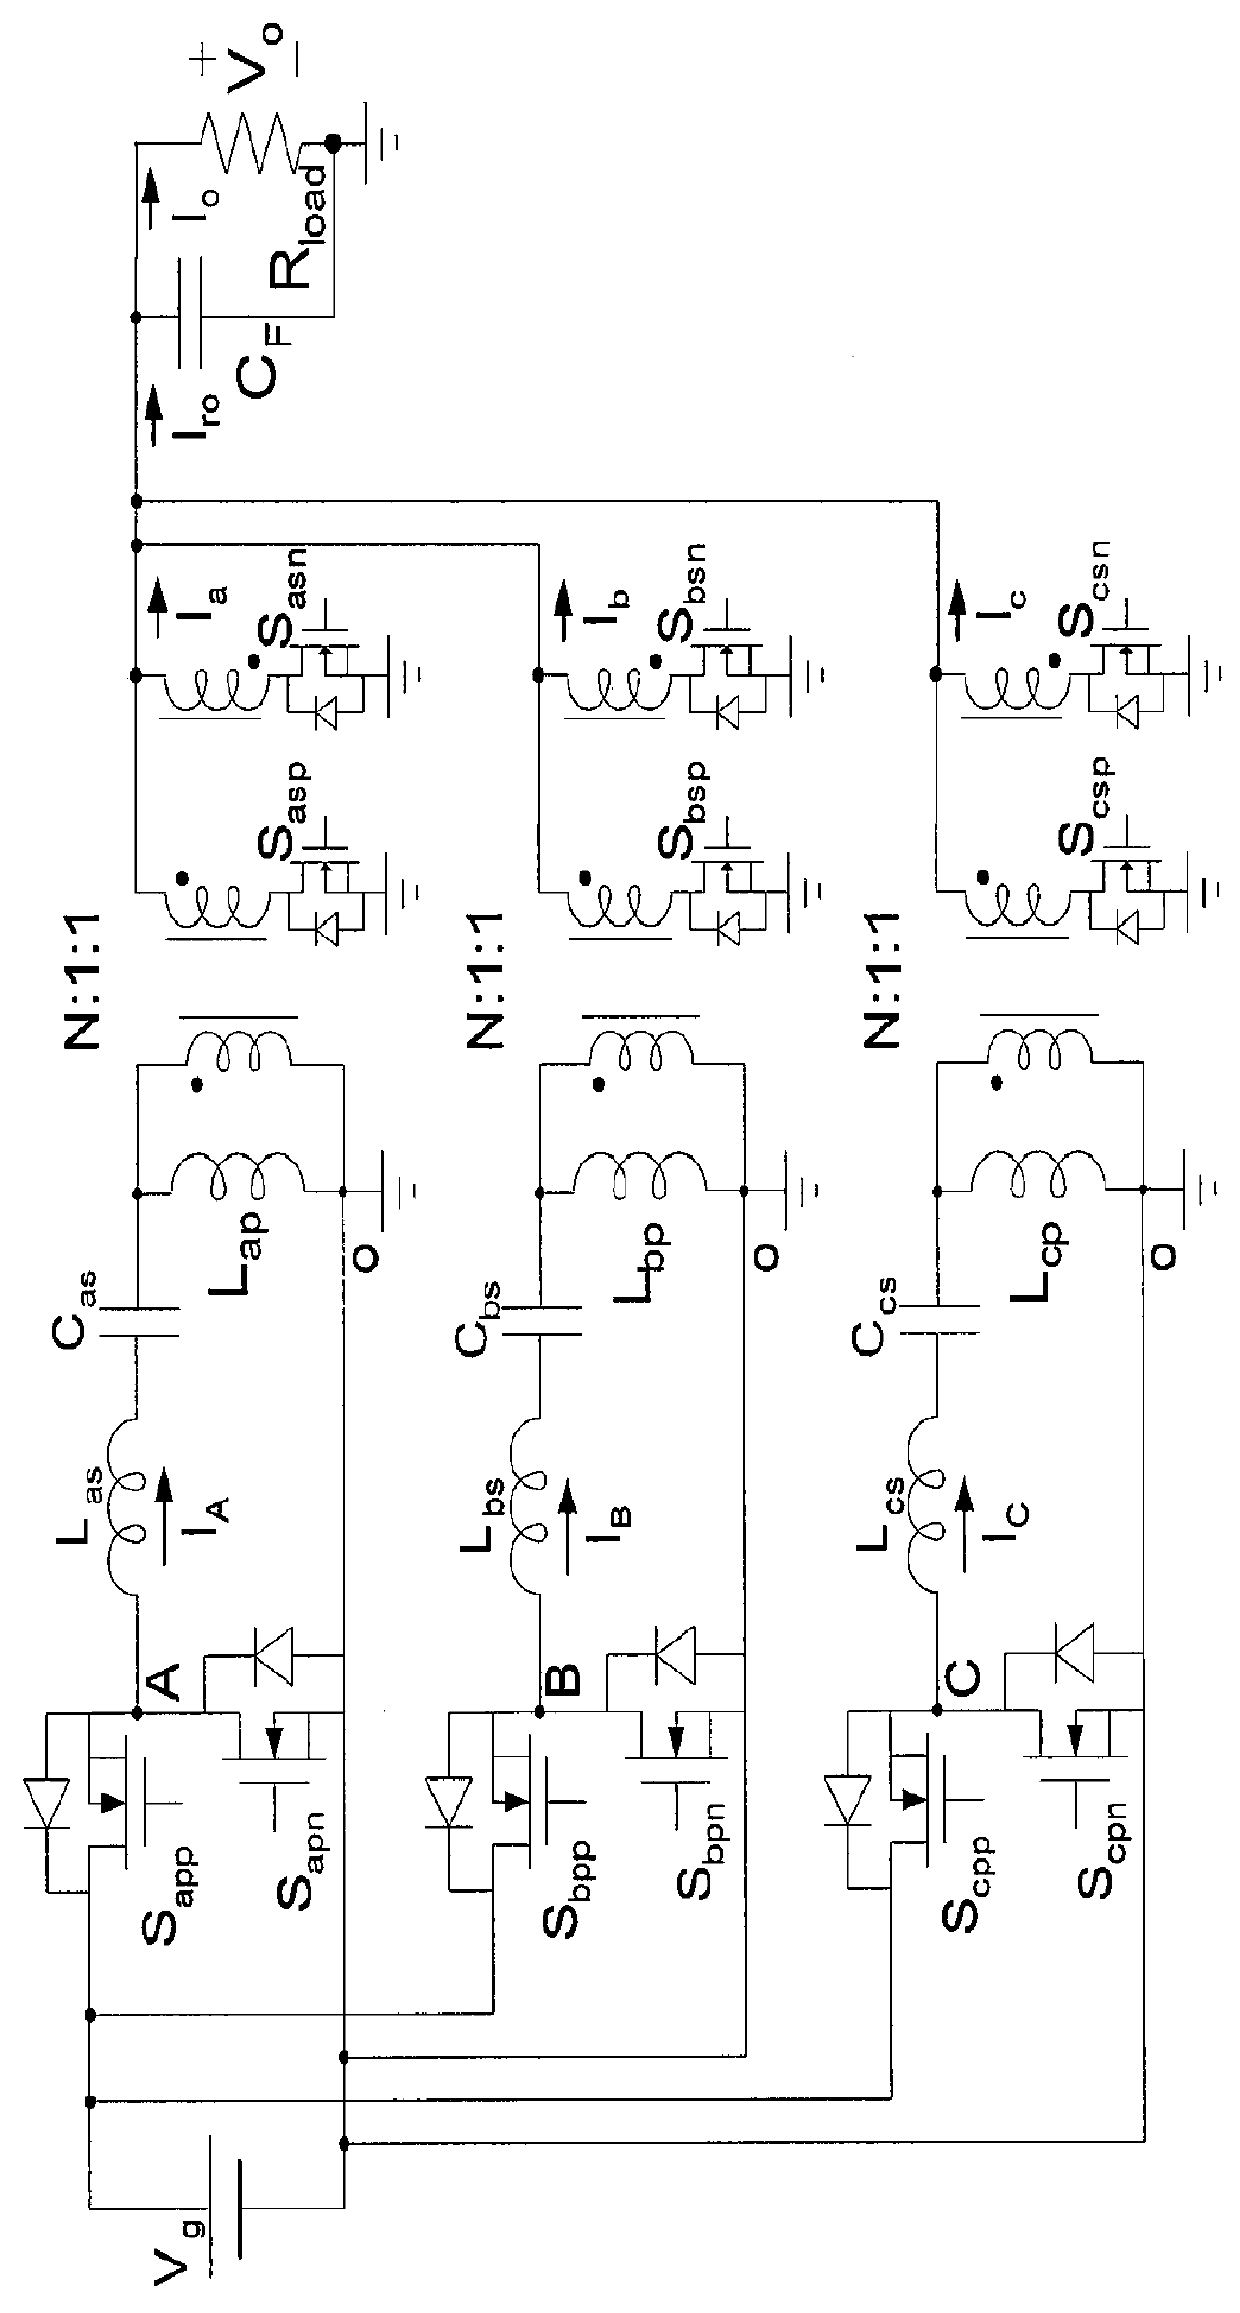 Multiphase resonant converter for DC-DC applications